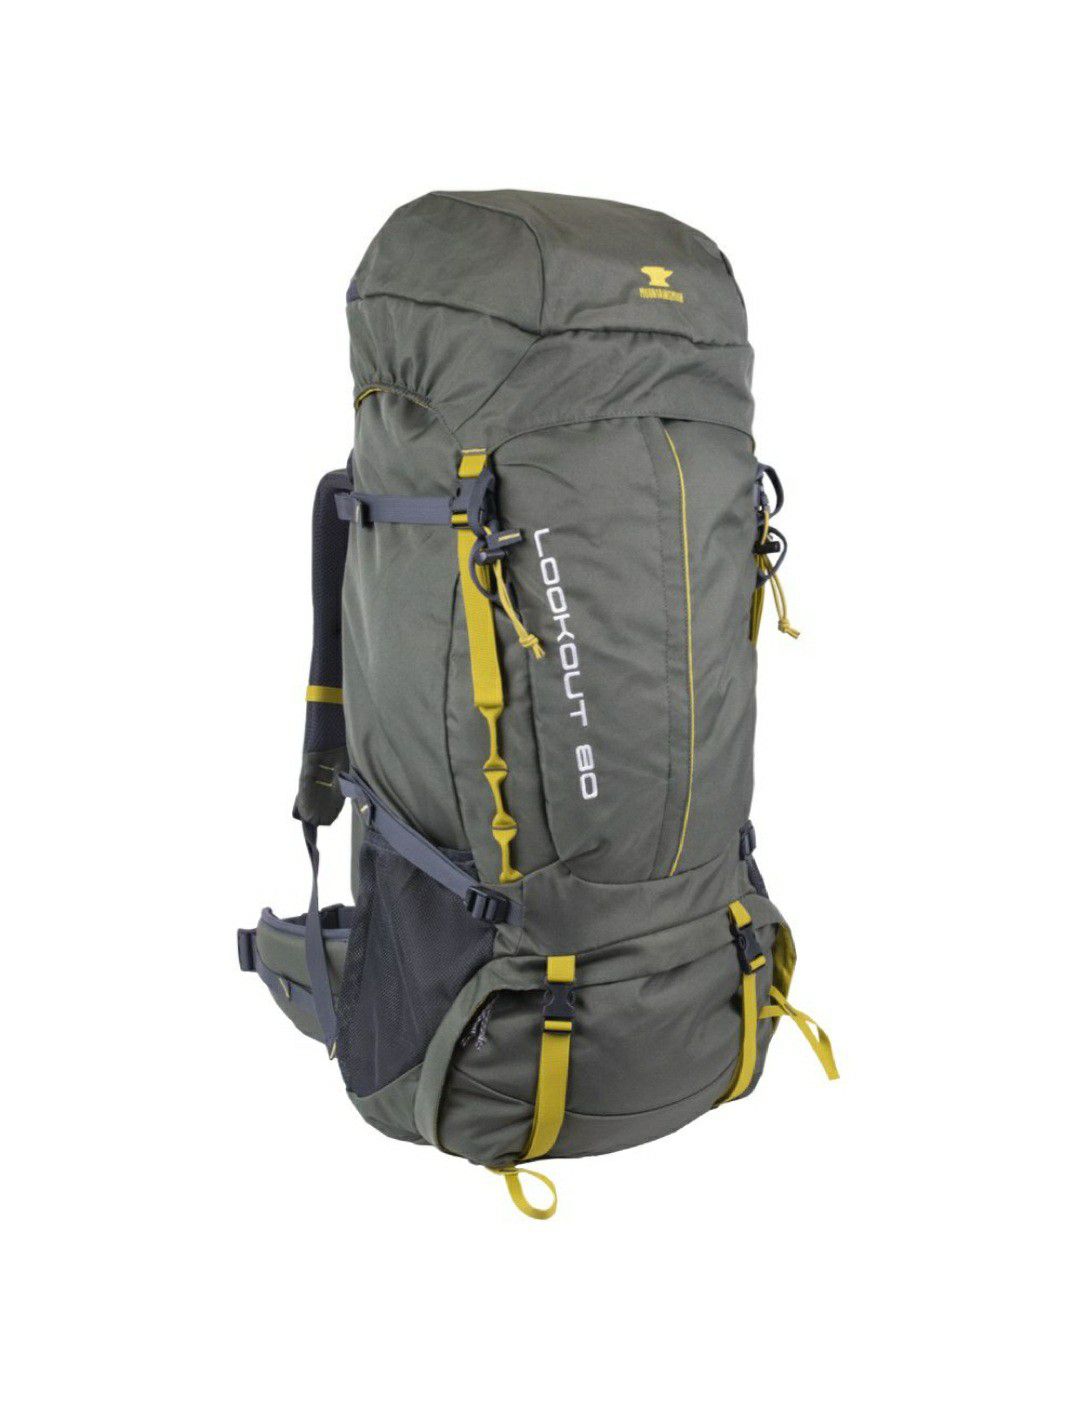 Hiking backpack- Lookout 80